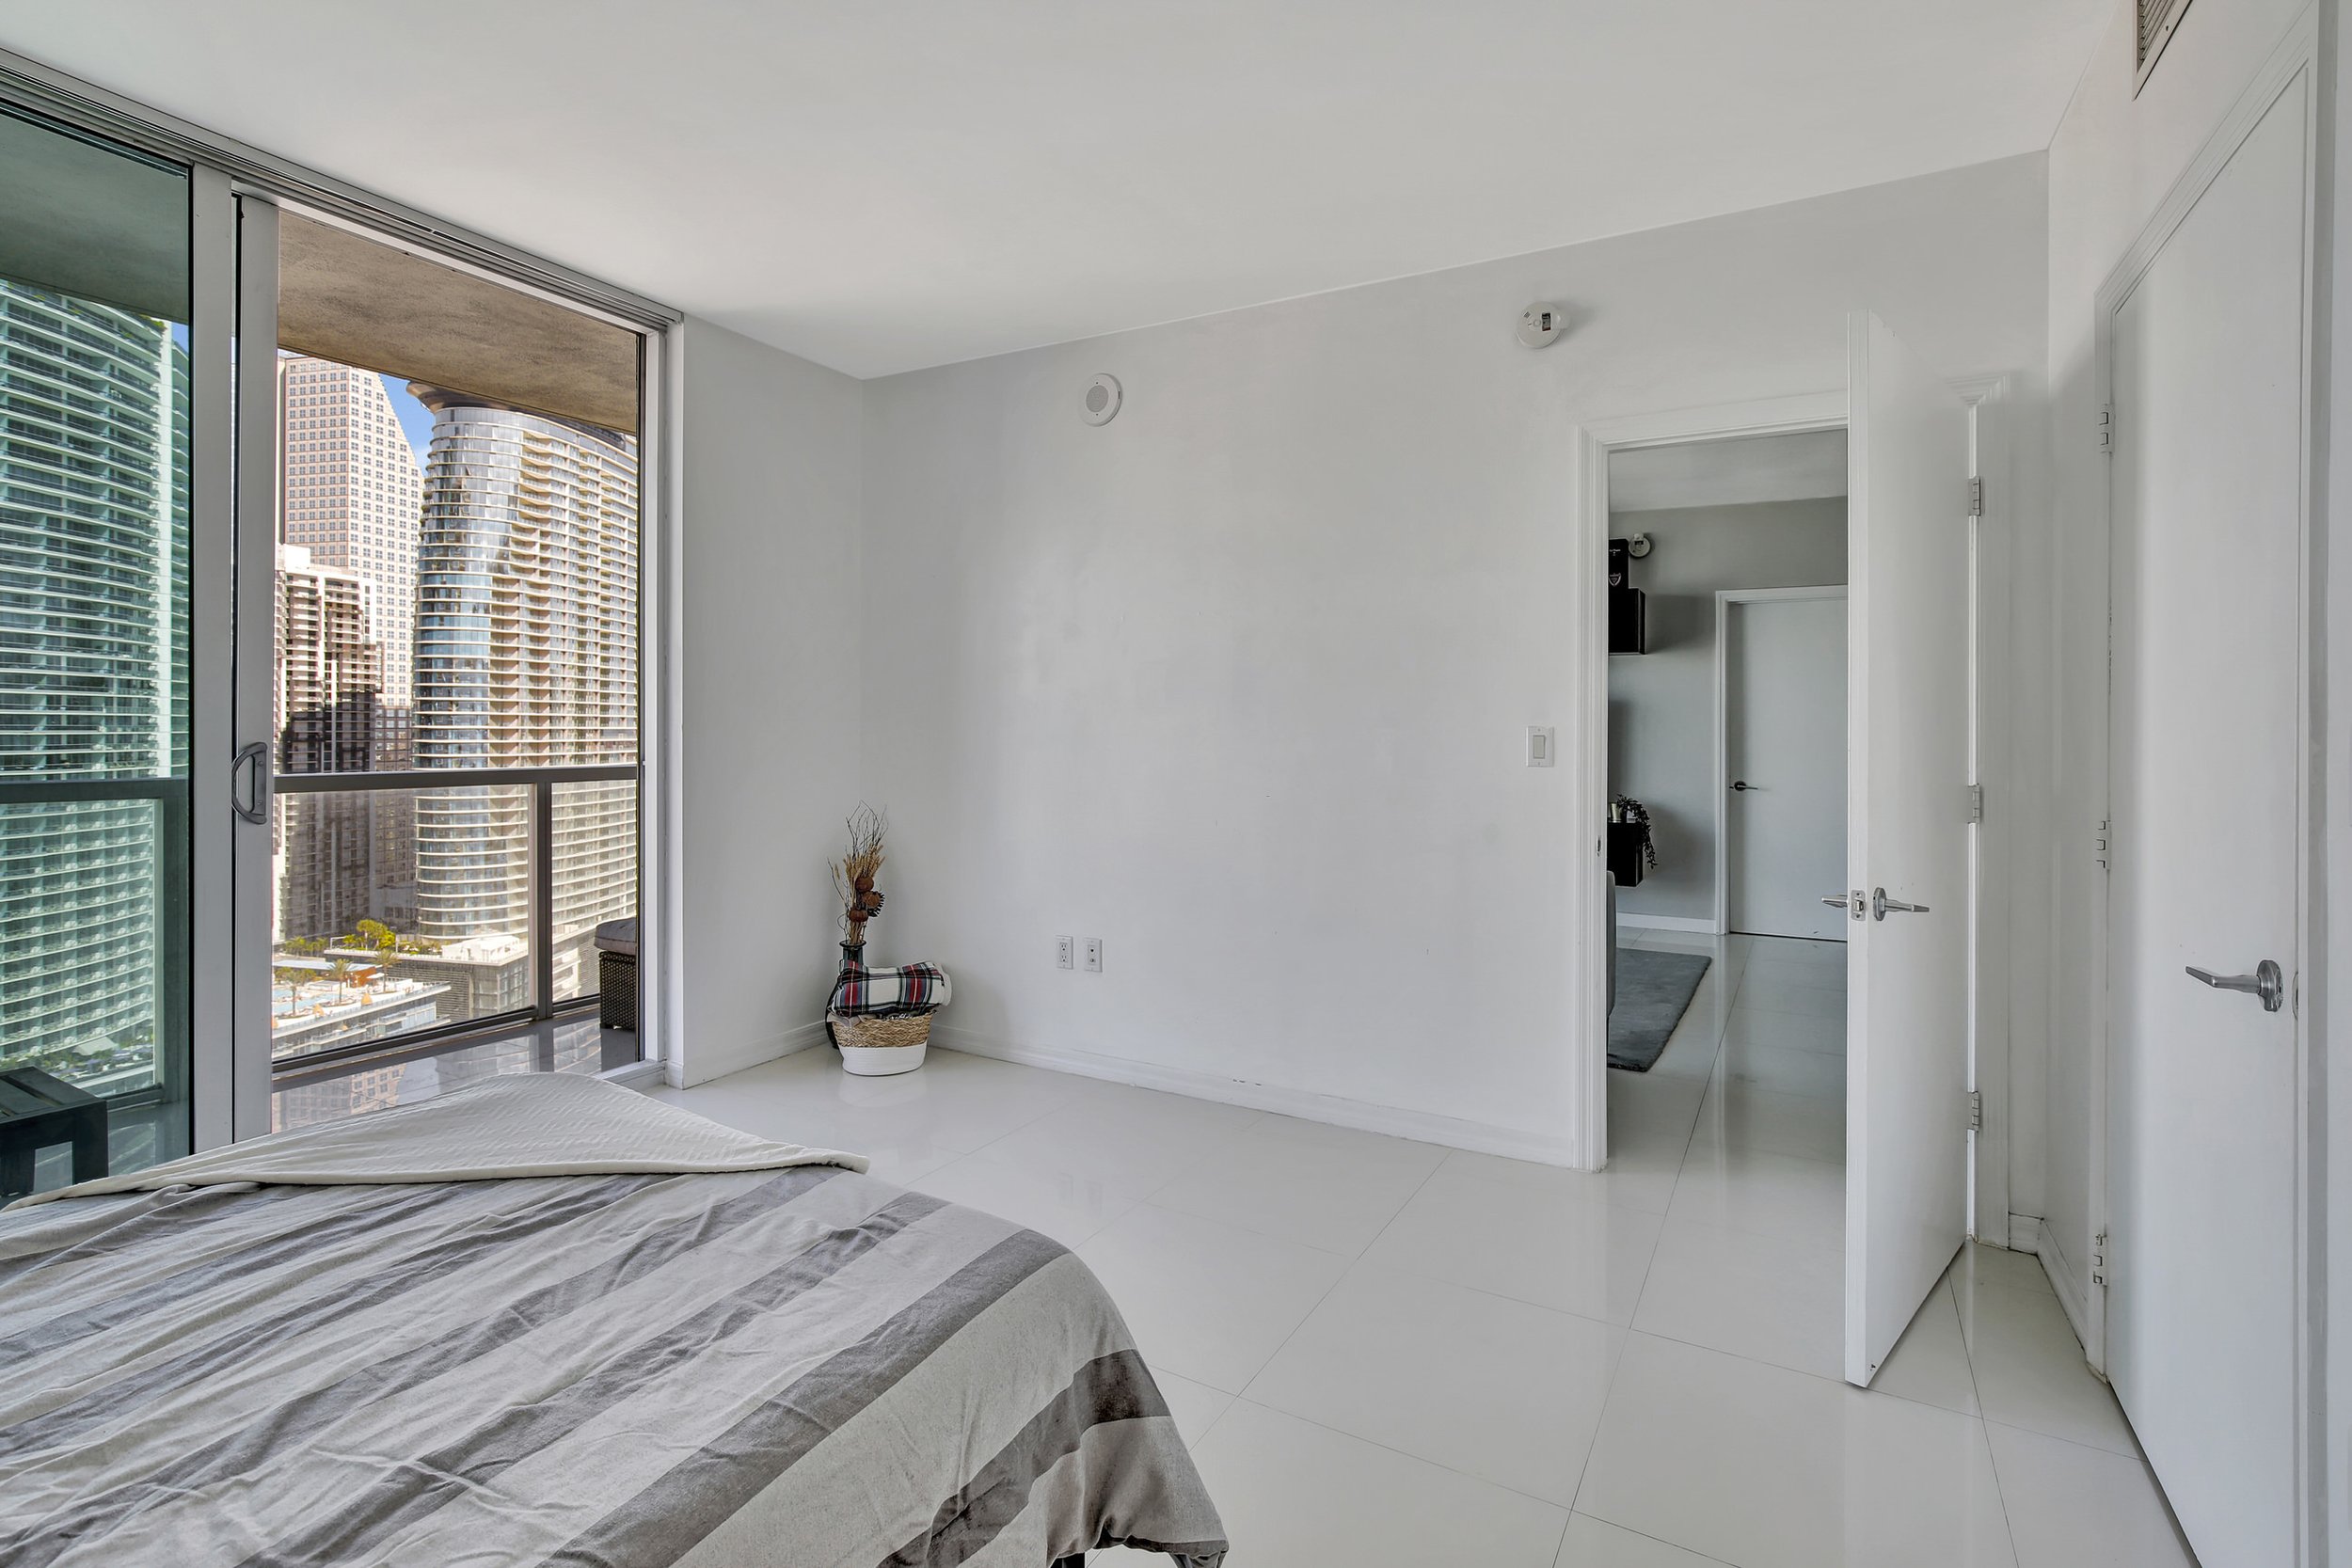 Check Out This Two-Bedroom Condo For Under $900K In Brickell 3.jpg